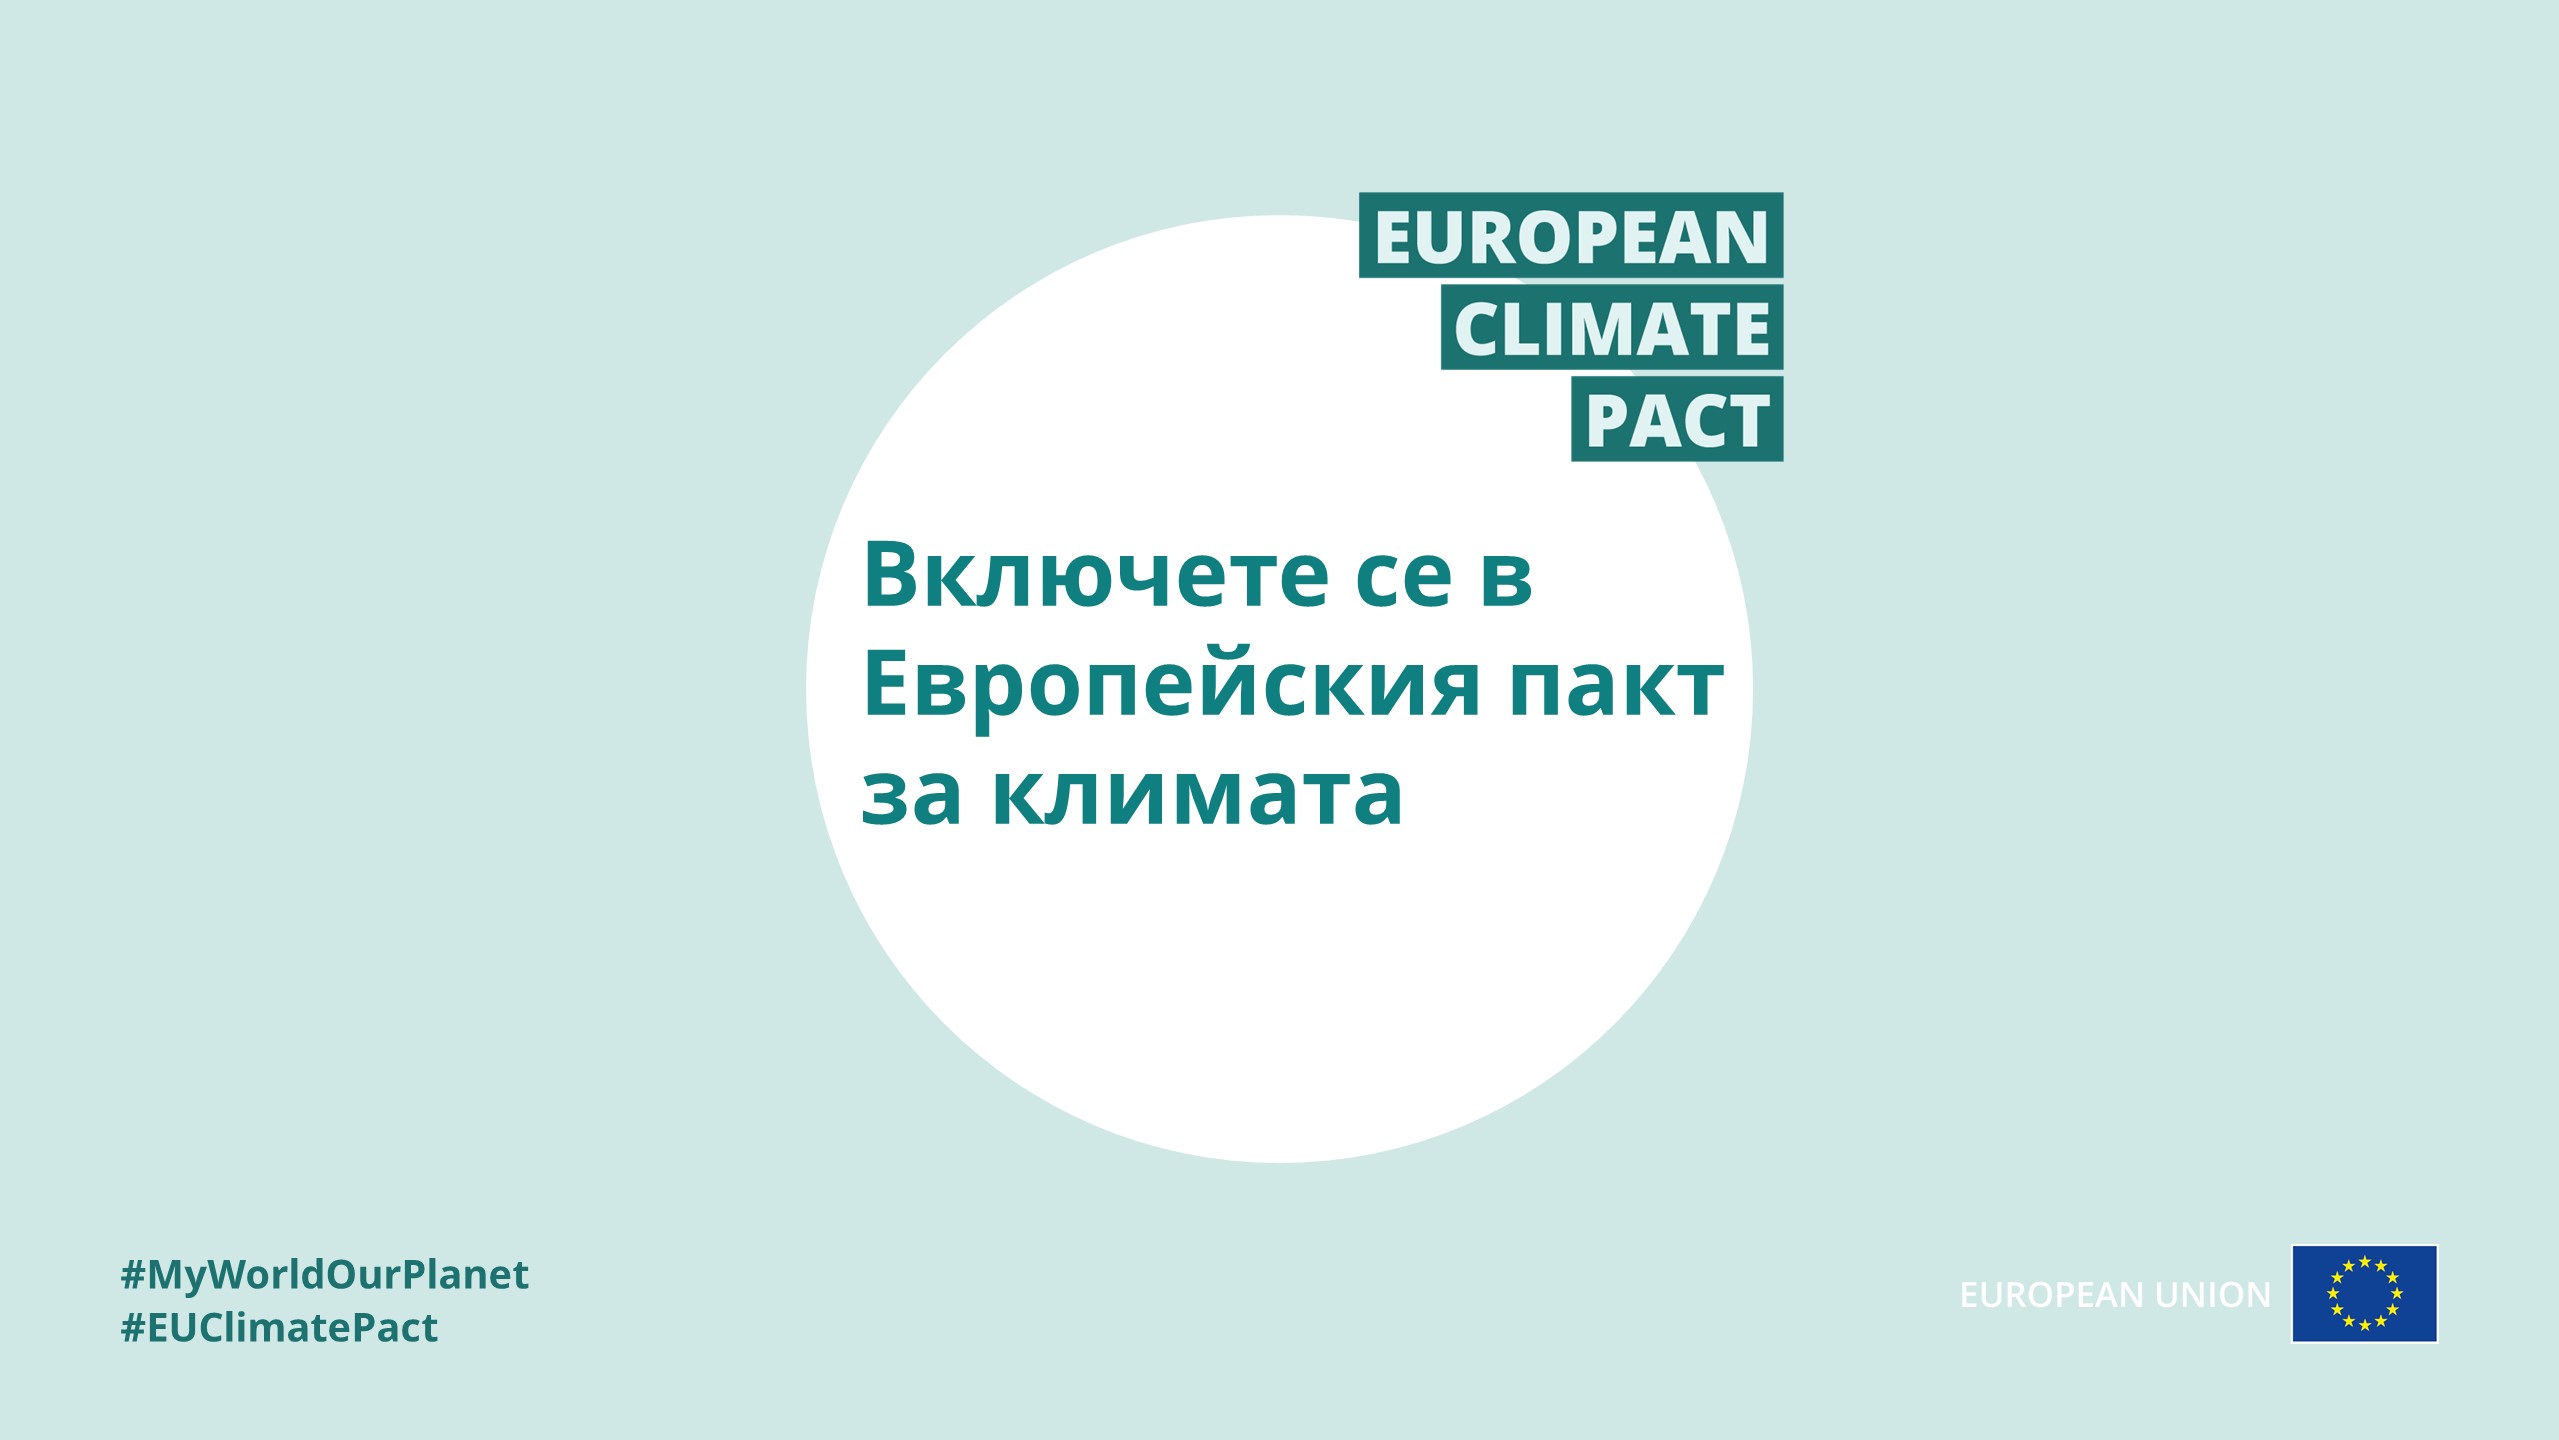 Join the European Climate Pact